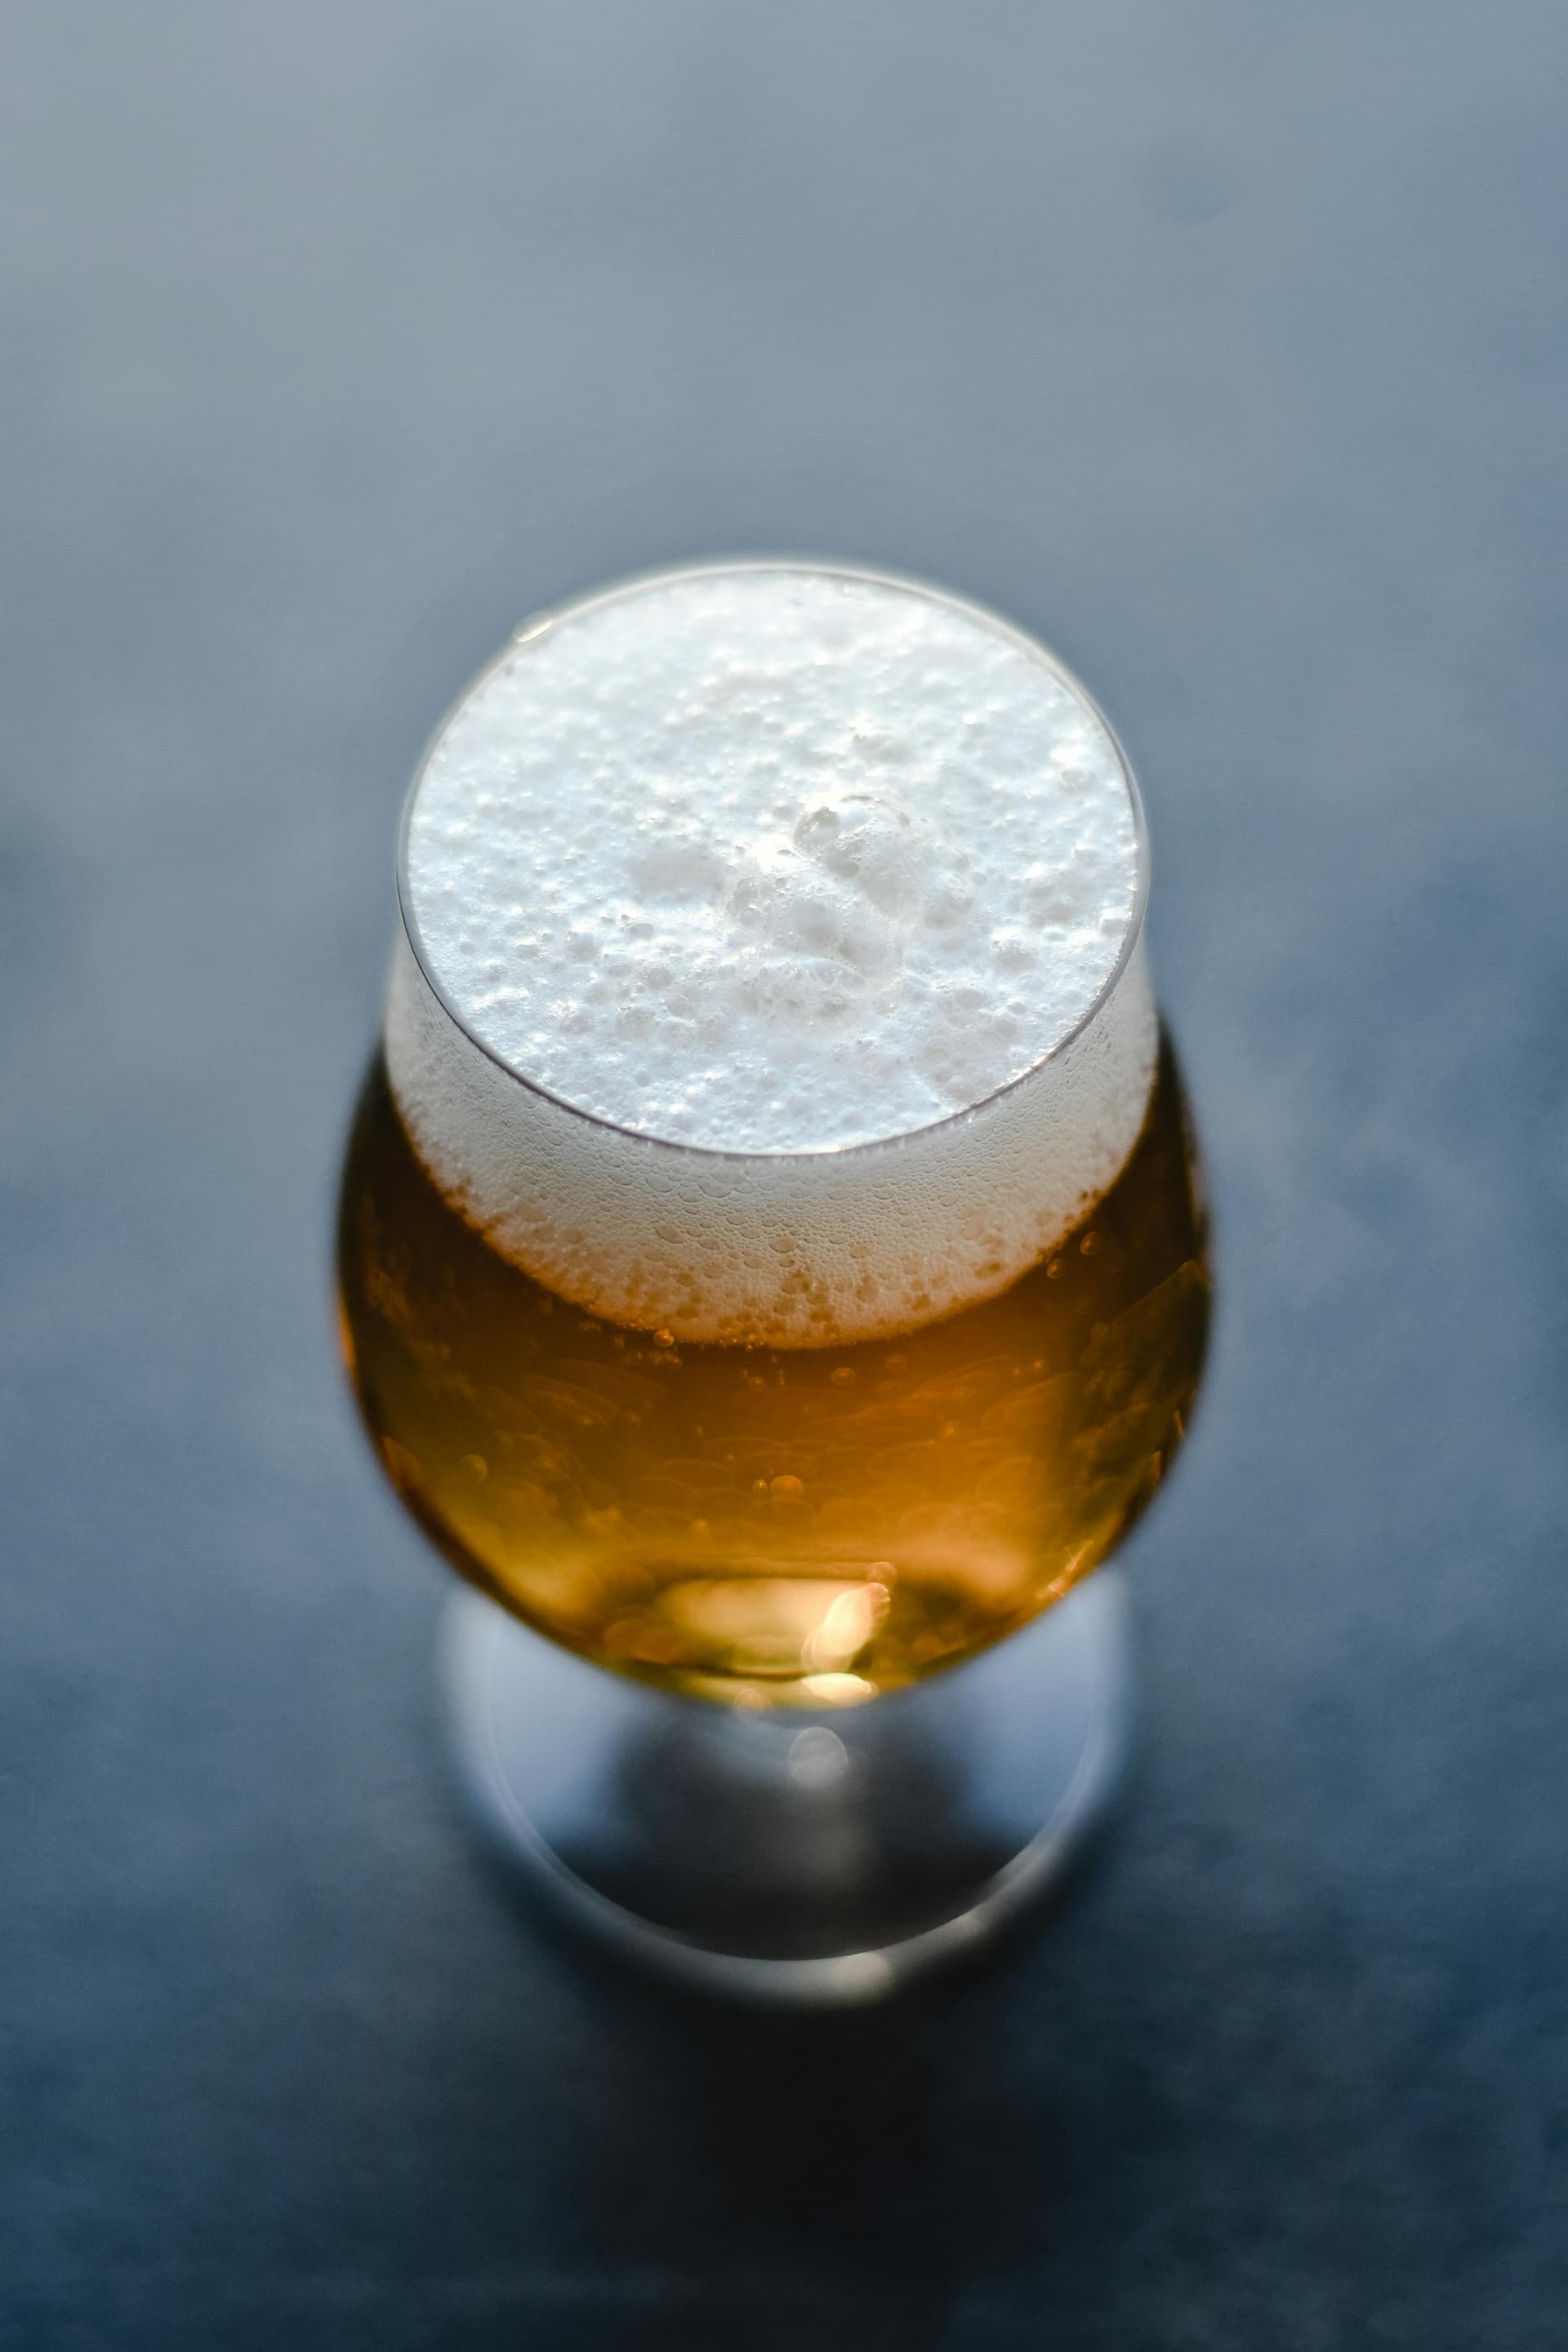 The Art of Pouring: How to Achieve the Perfect Frothy Head